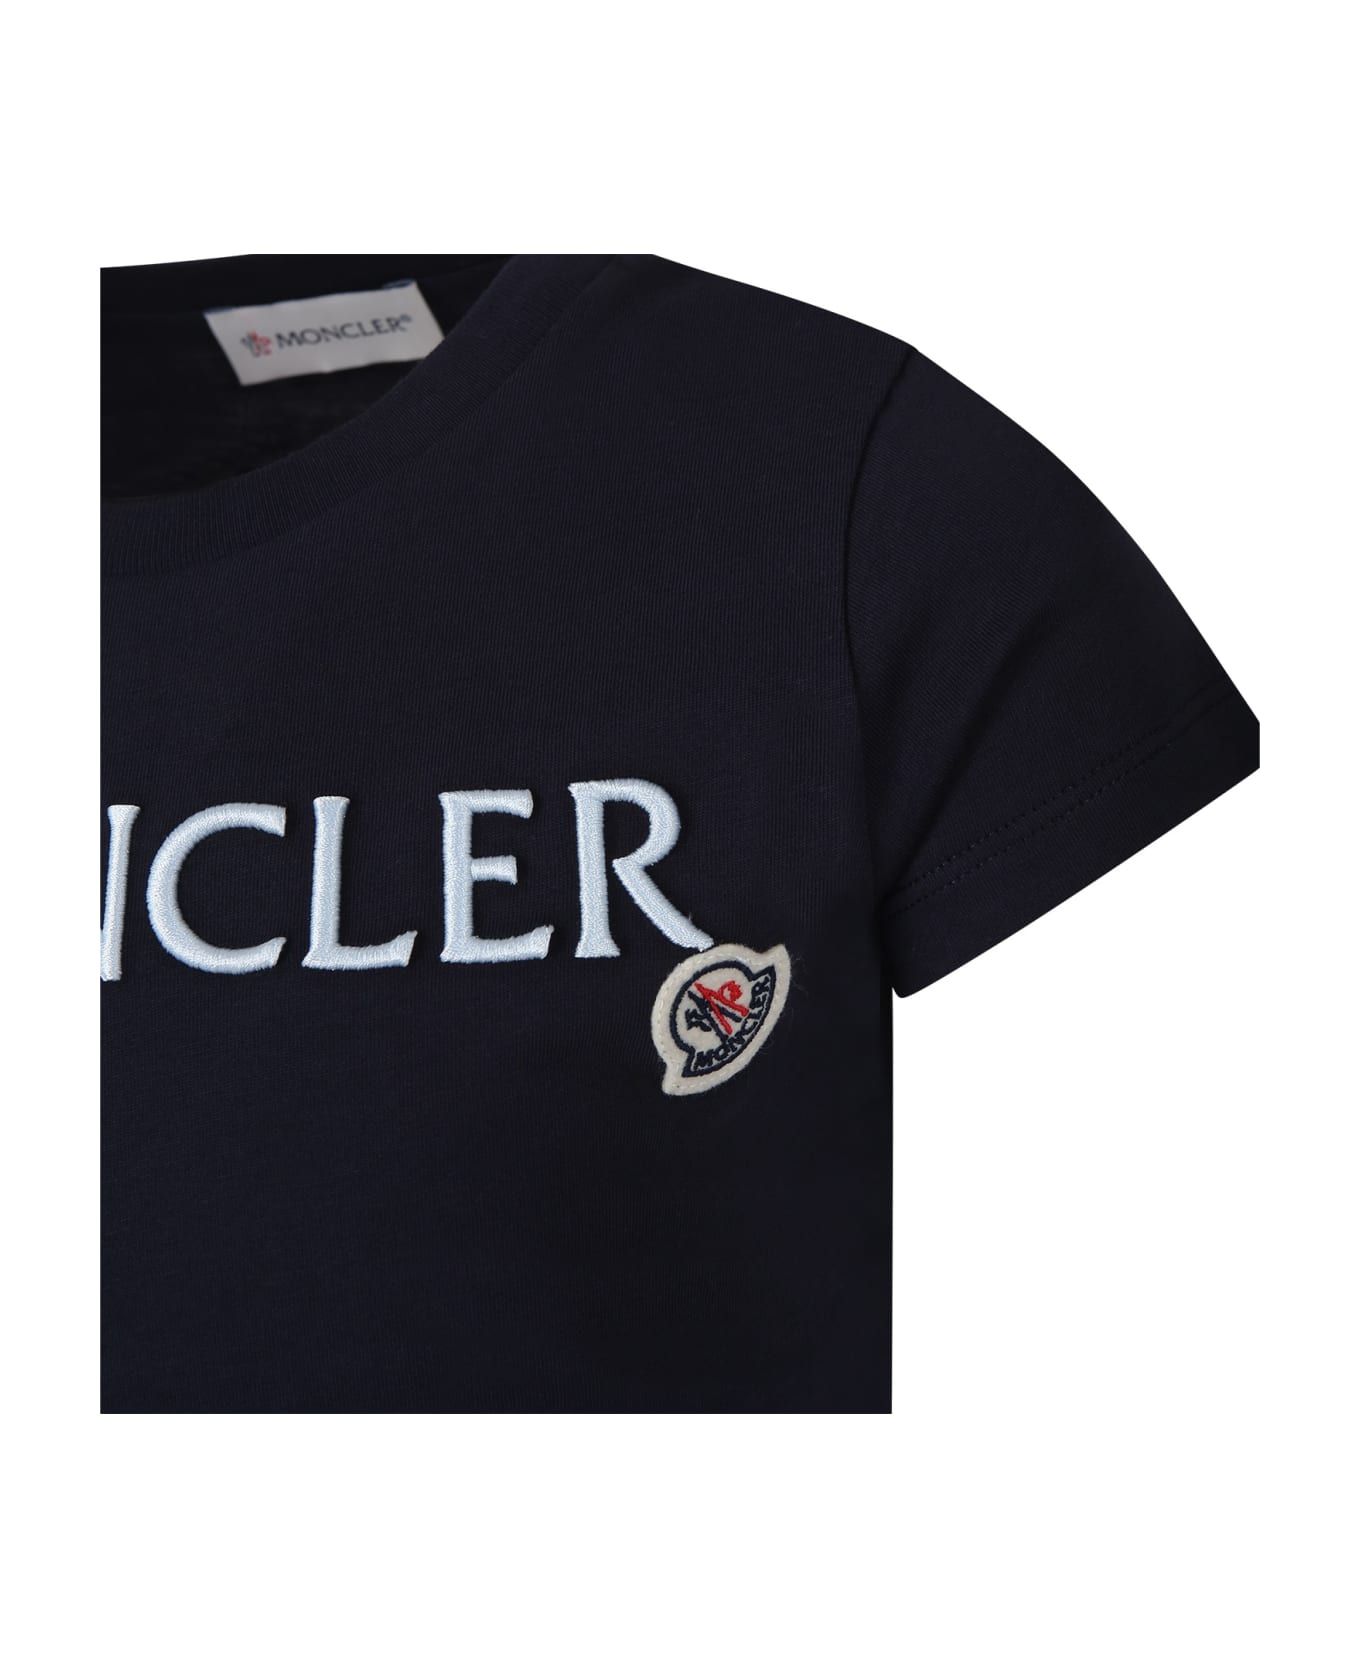 Moncler Blue T-shirt For Girl With Logo - Blue